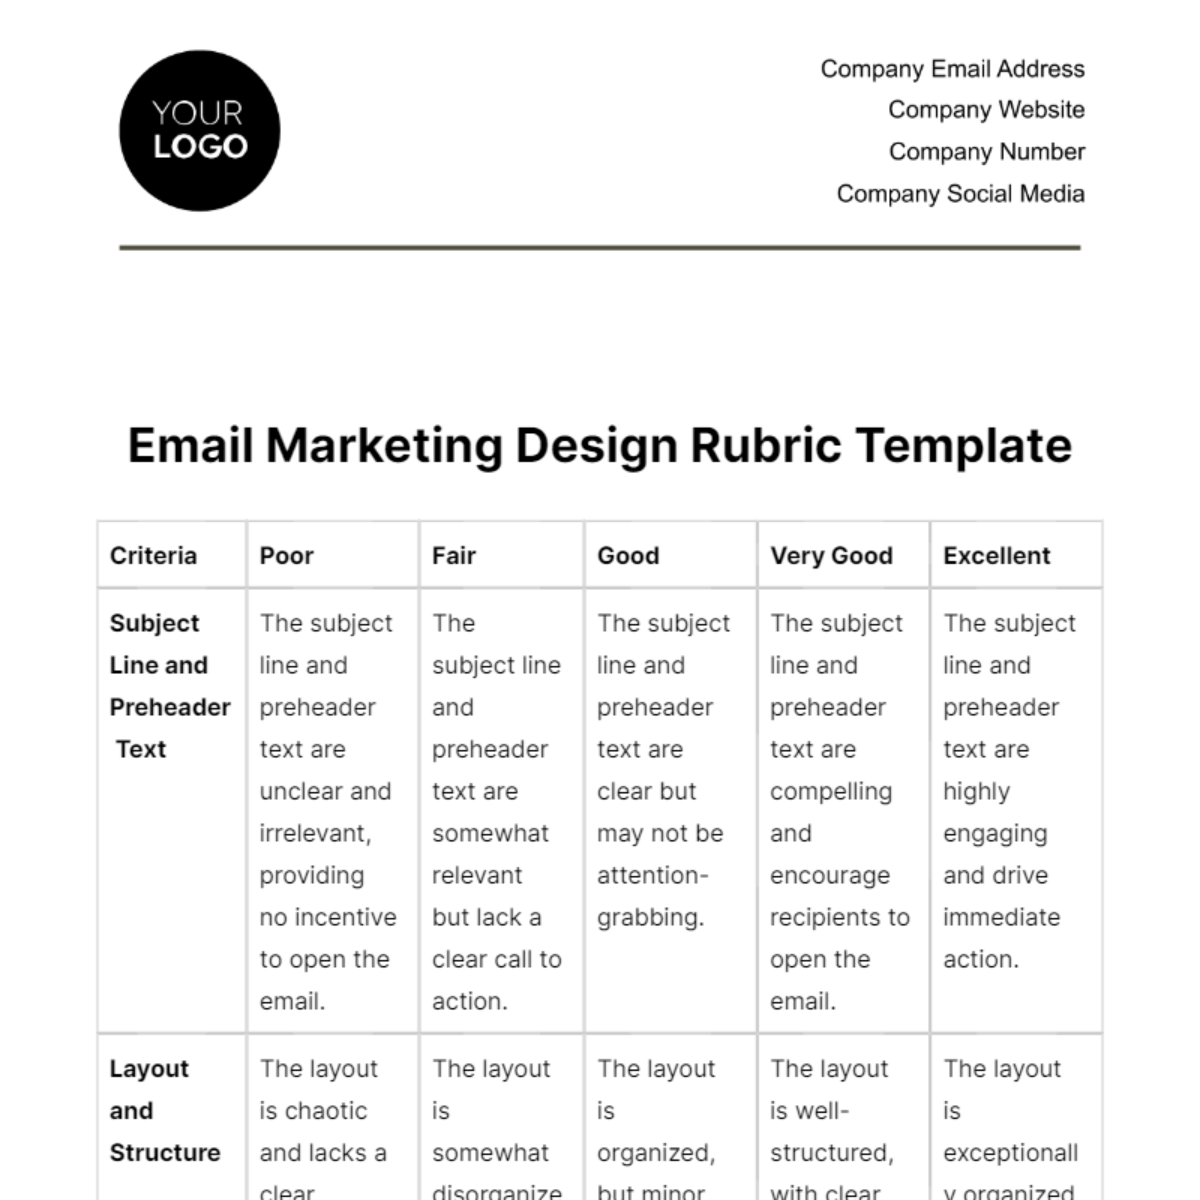 Free Email Marketing Design Rubric Template